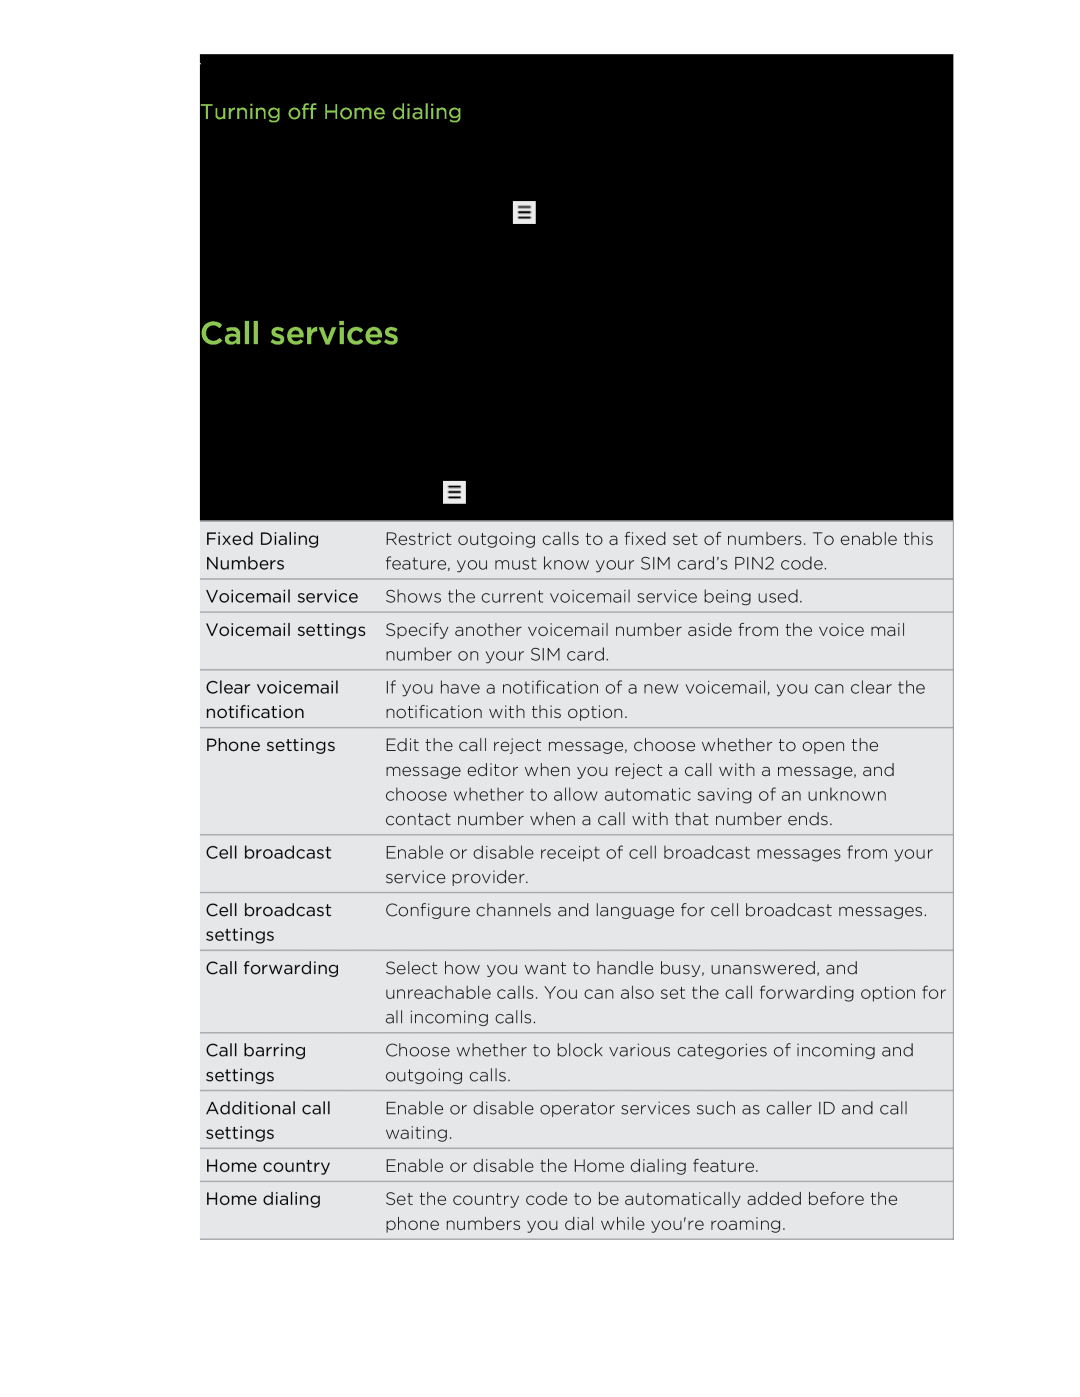 HTC S manual Call services, Turning off Home dialing 